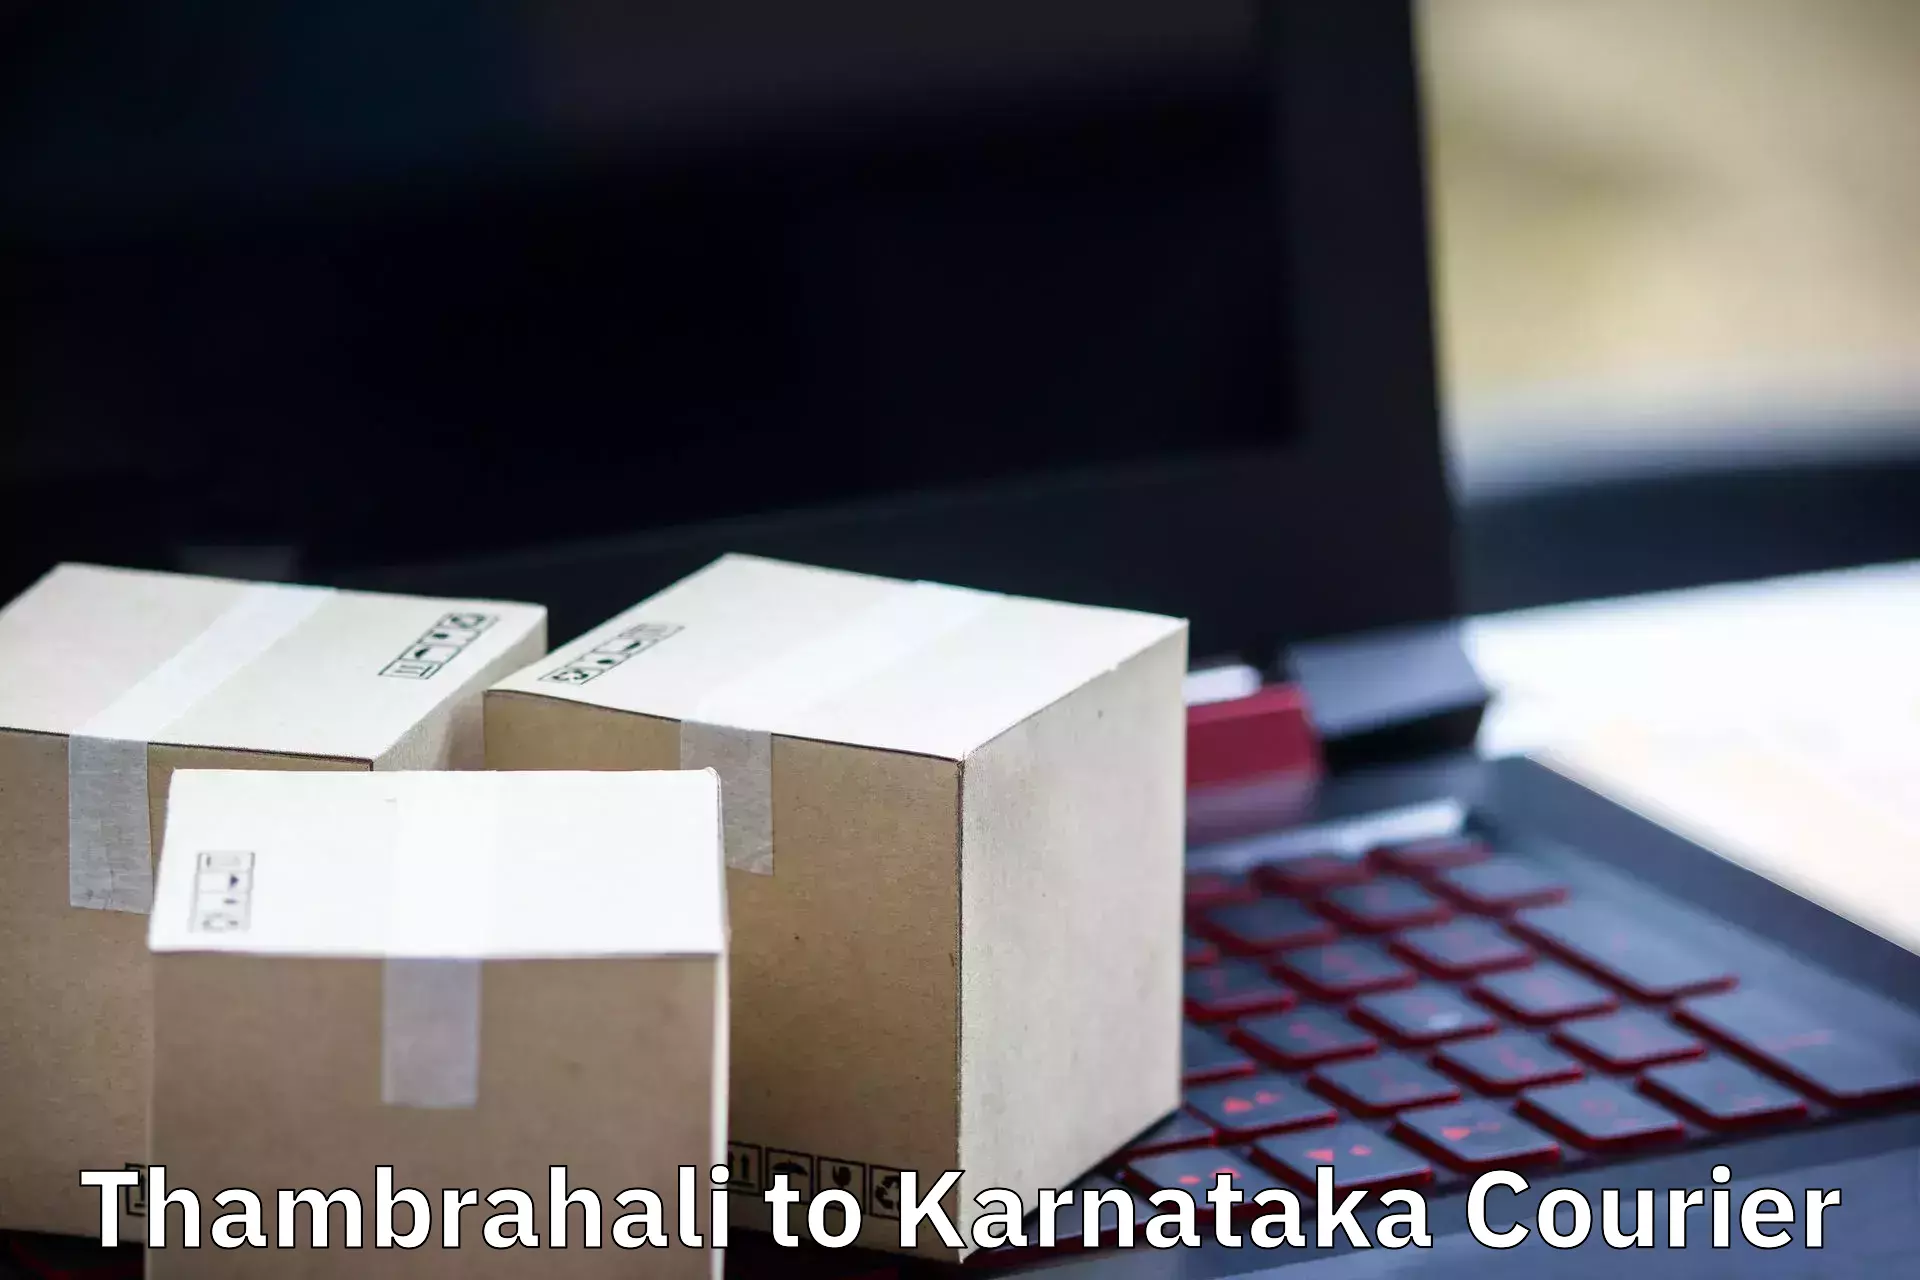 Furniture moving experts Thambrahali to Dharwad